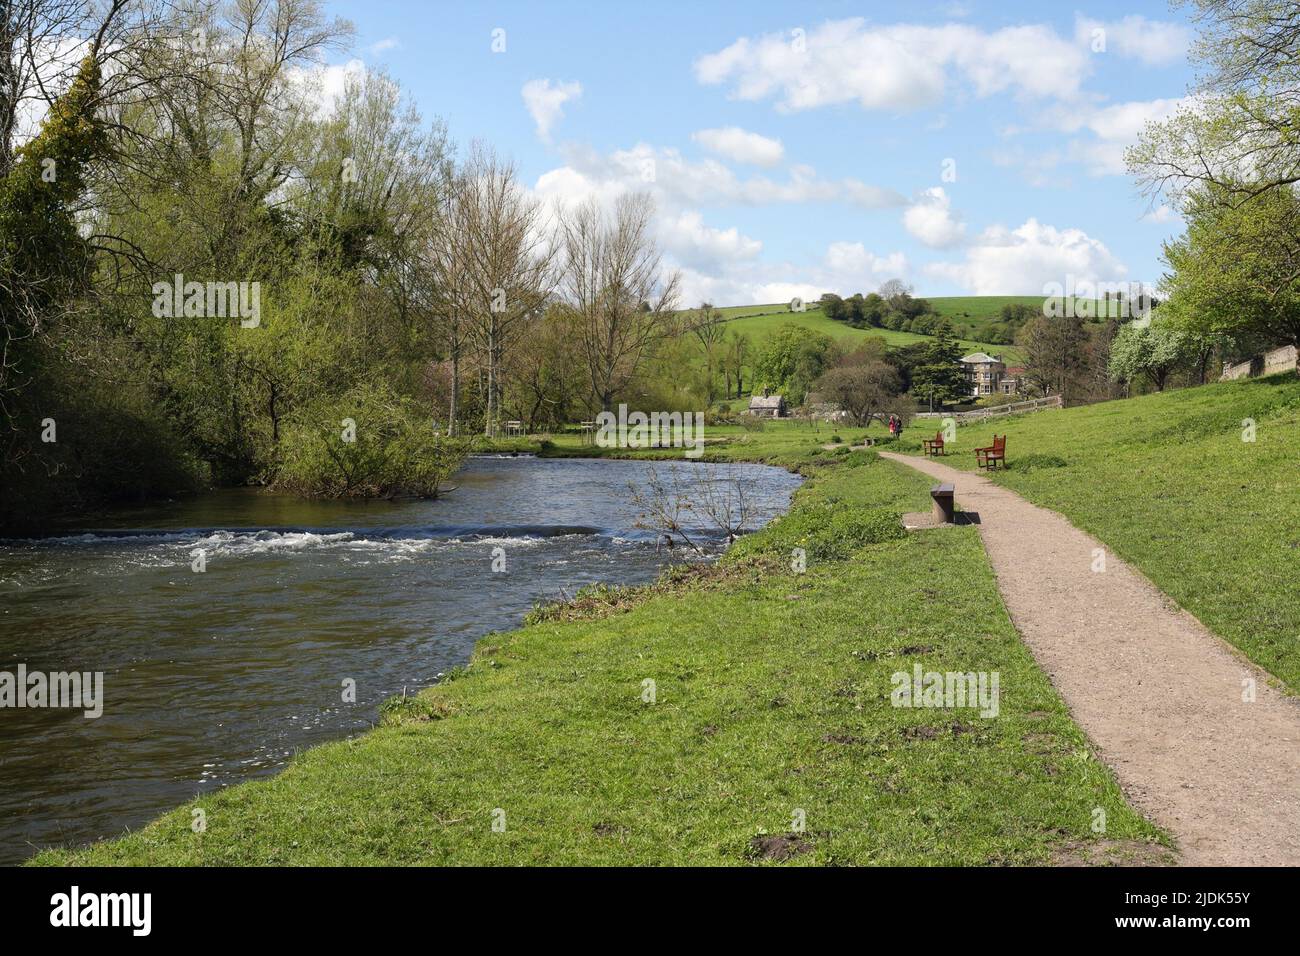 Footpath River Wye in Bakewell, Derbyshire England UK. Peak district National Park, flowing water. Scenic landscape Stock Photo